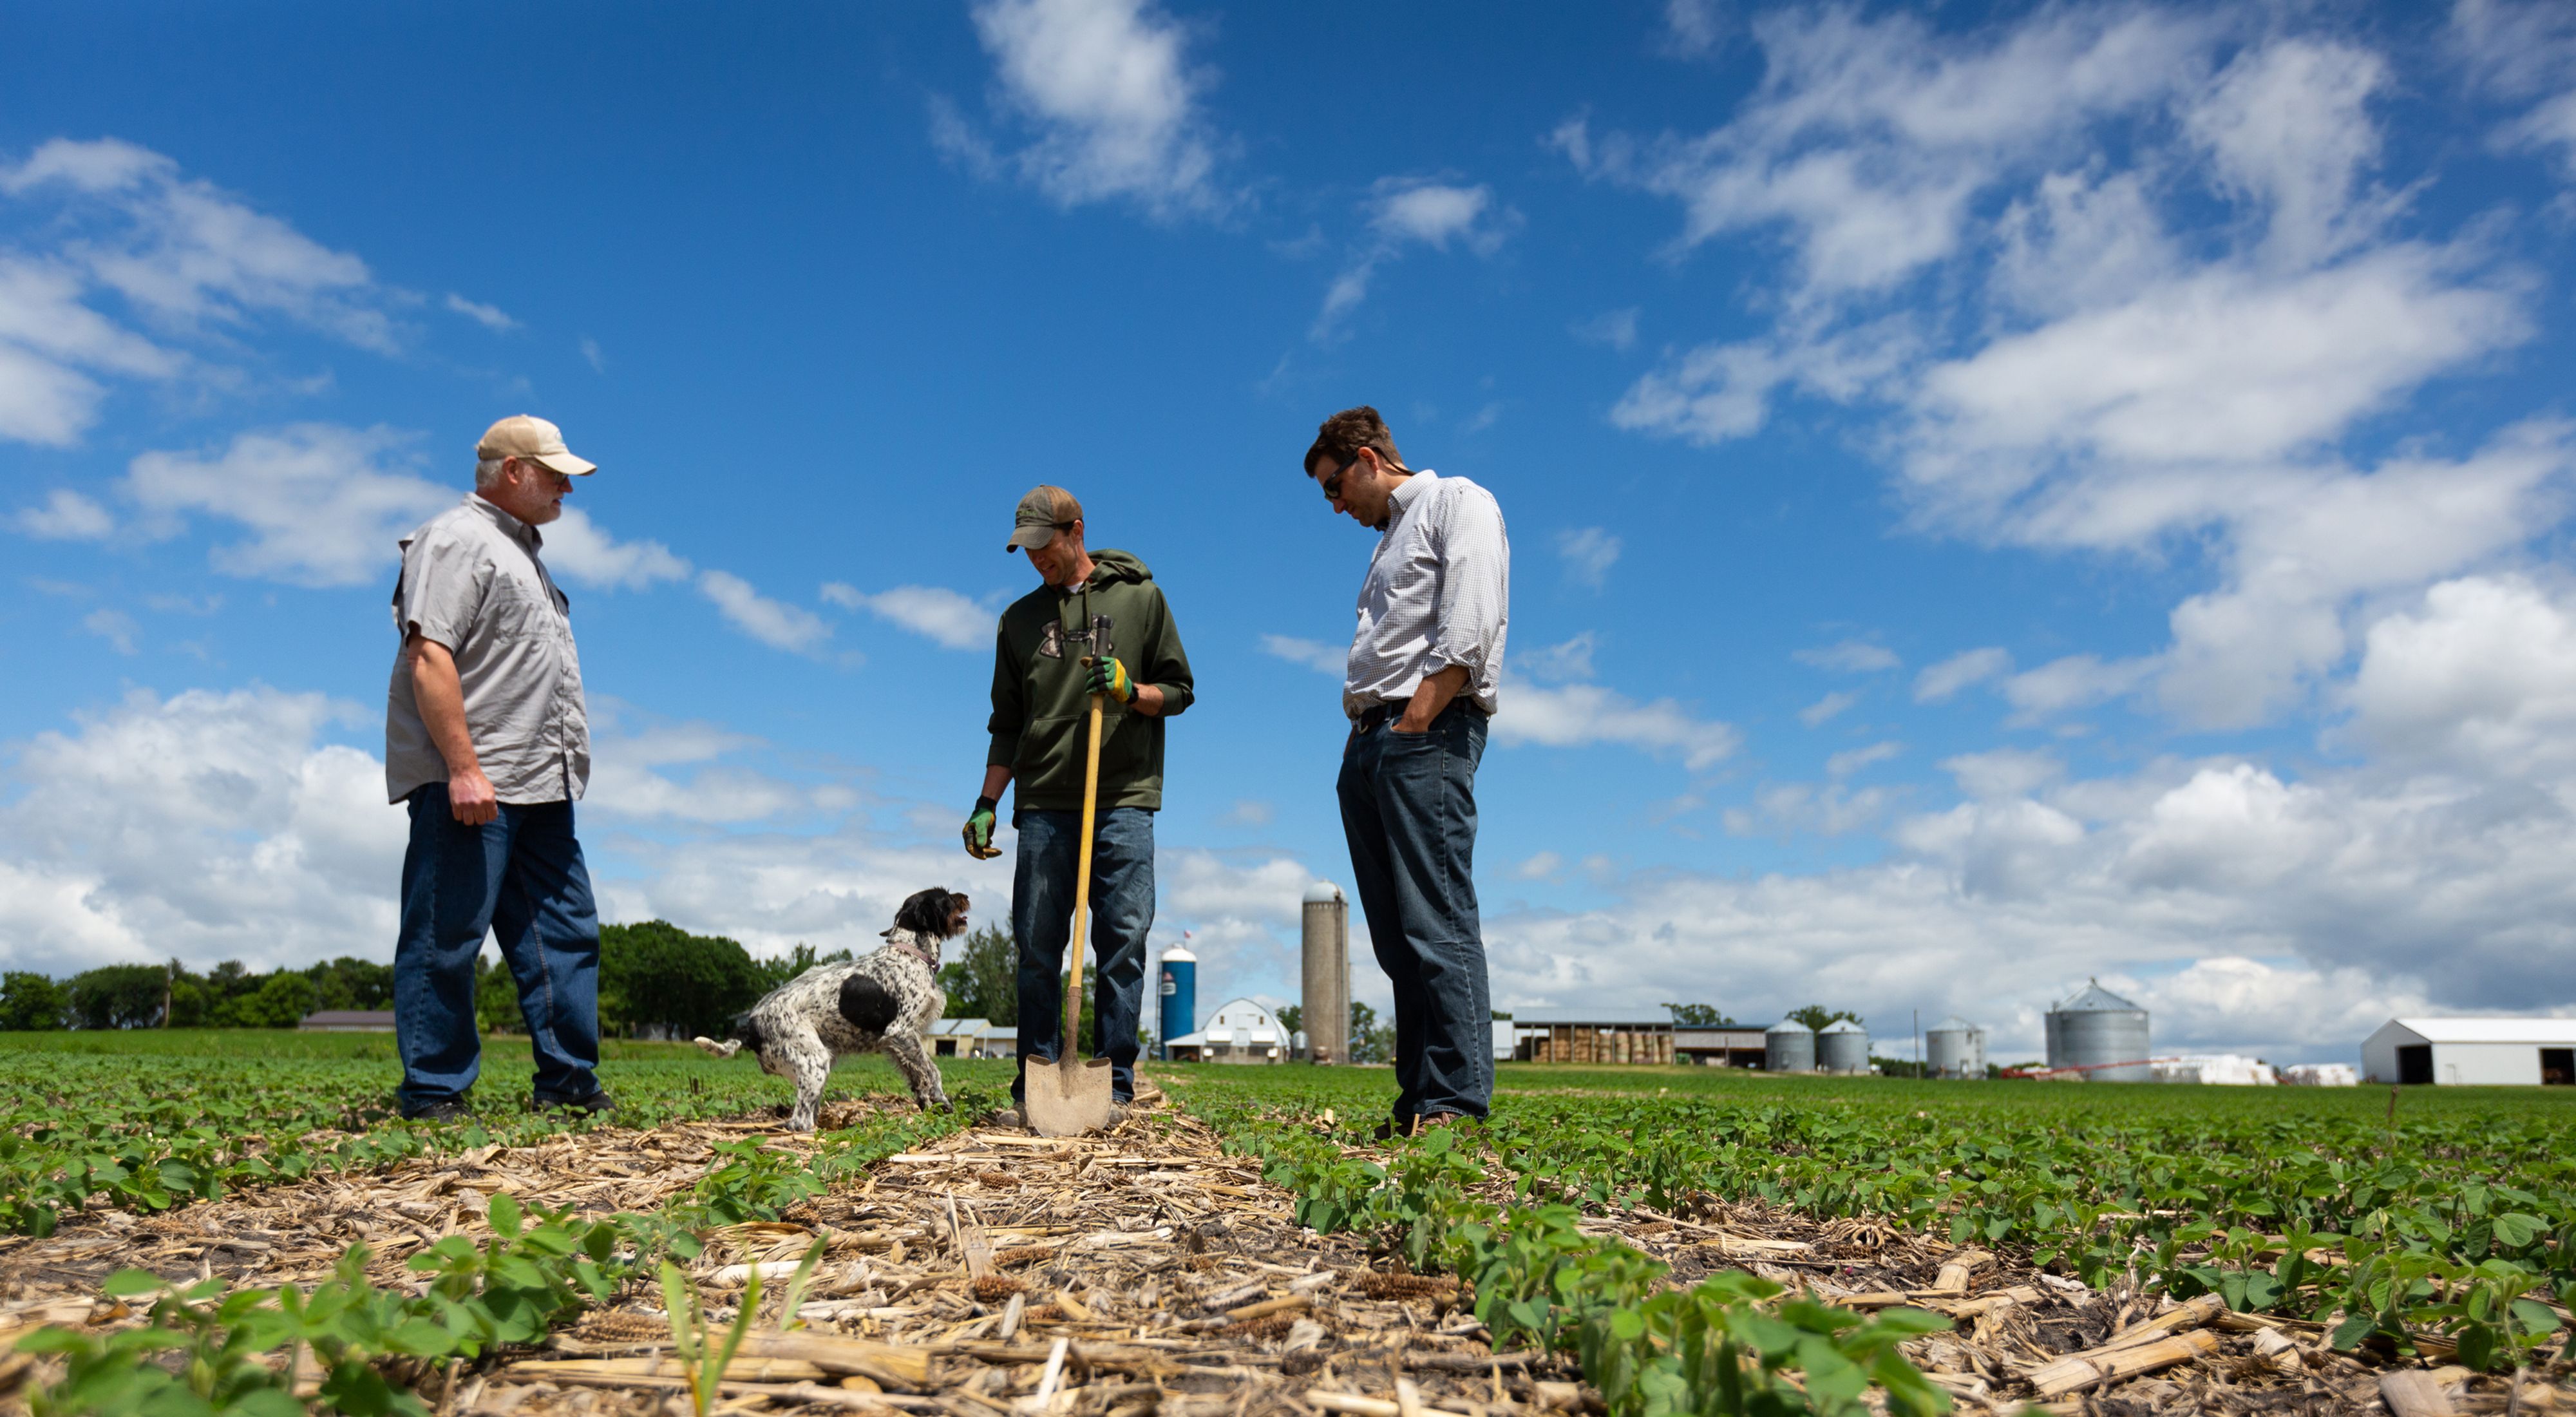 Two agronomists, a farmer and a dog standing in a cover cropped farm field.